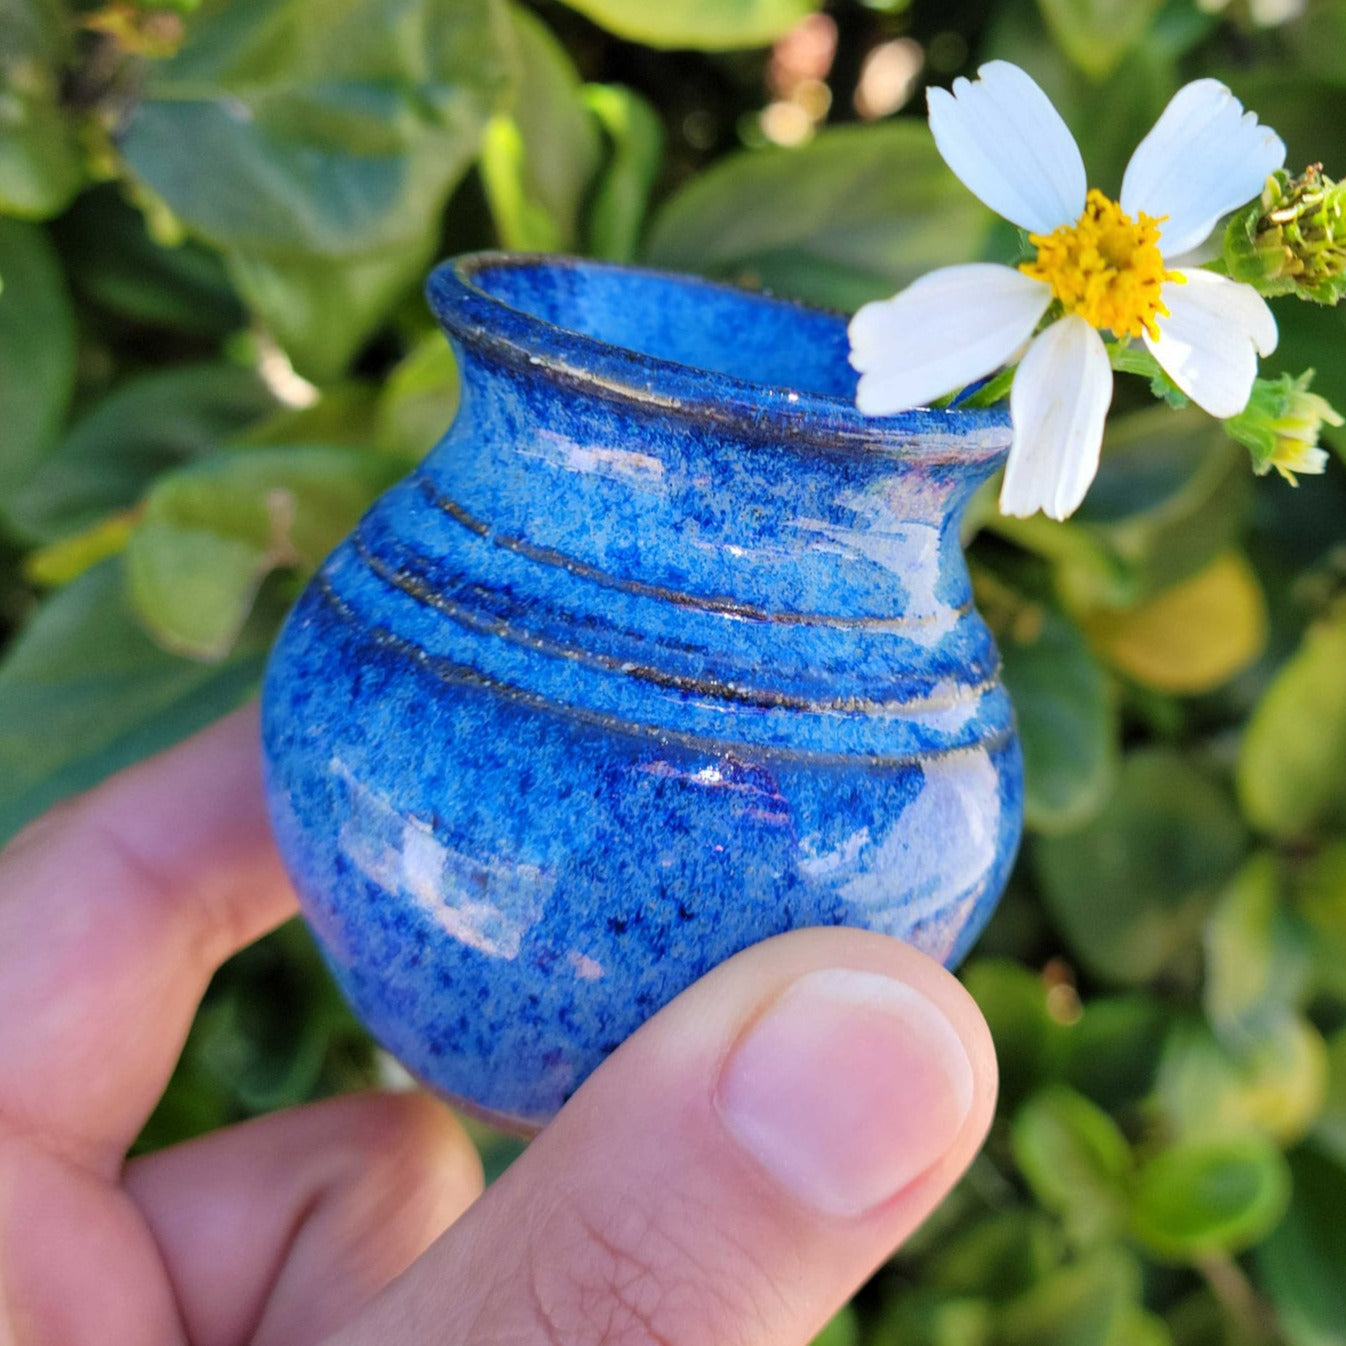 Miniature Pottery Vase for Small Flowers Green